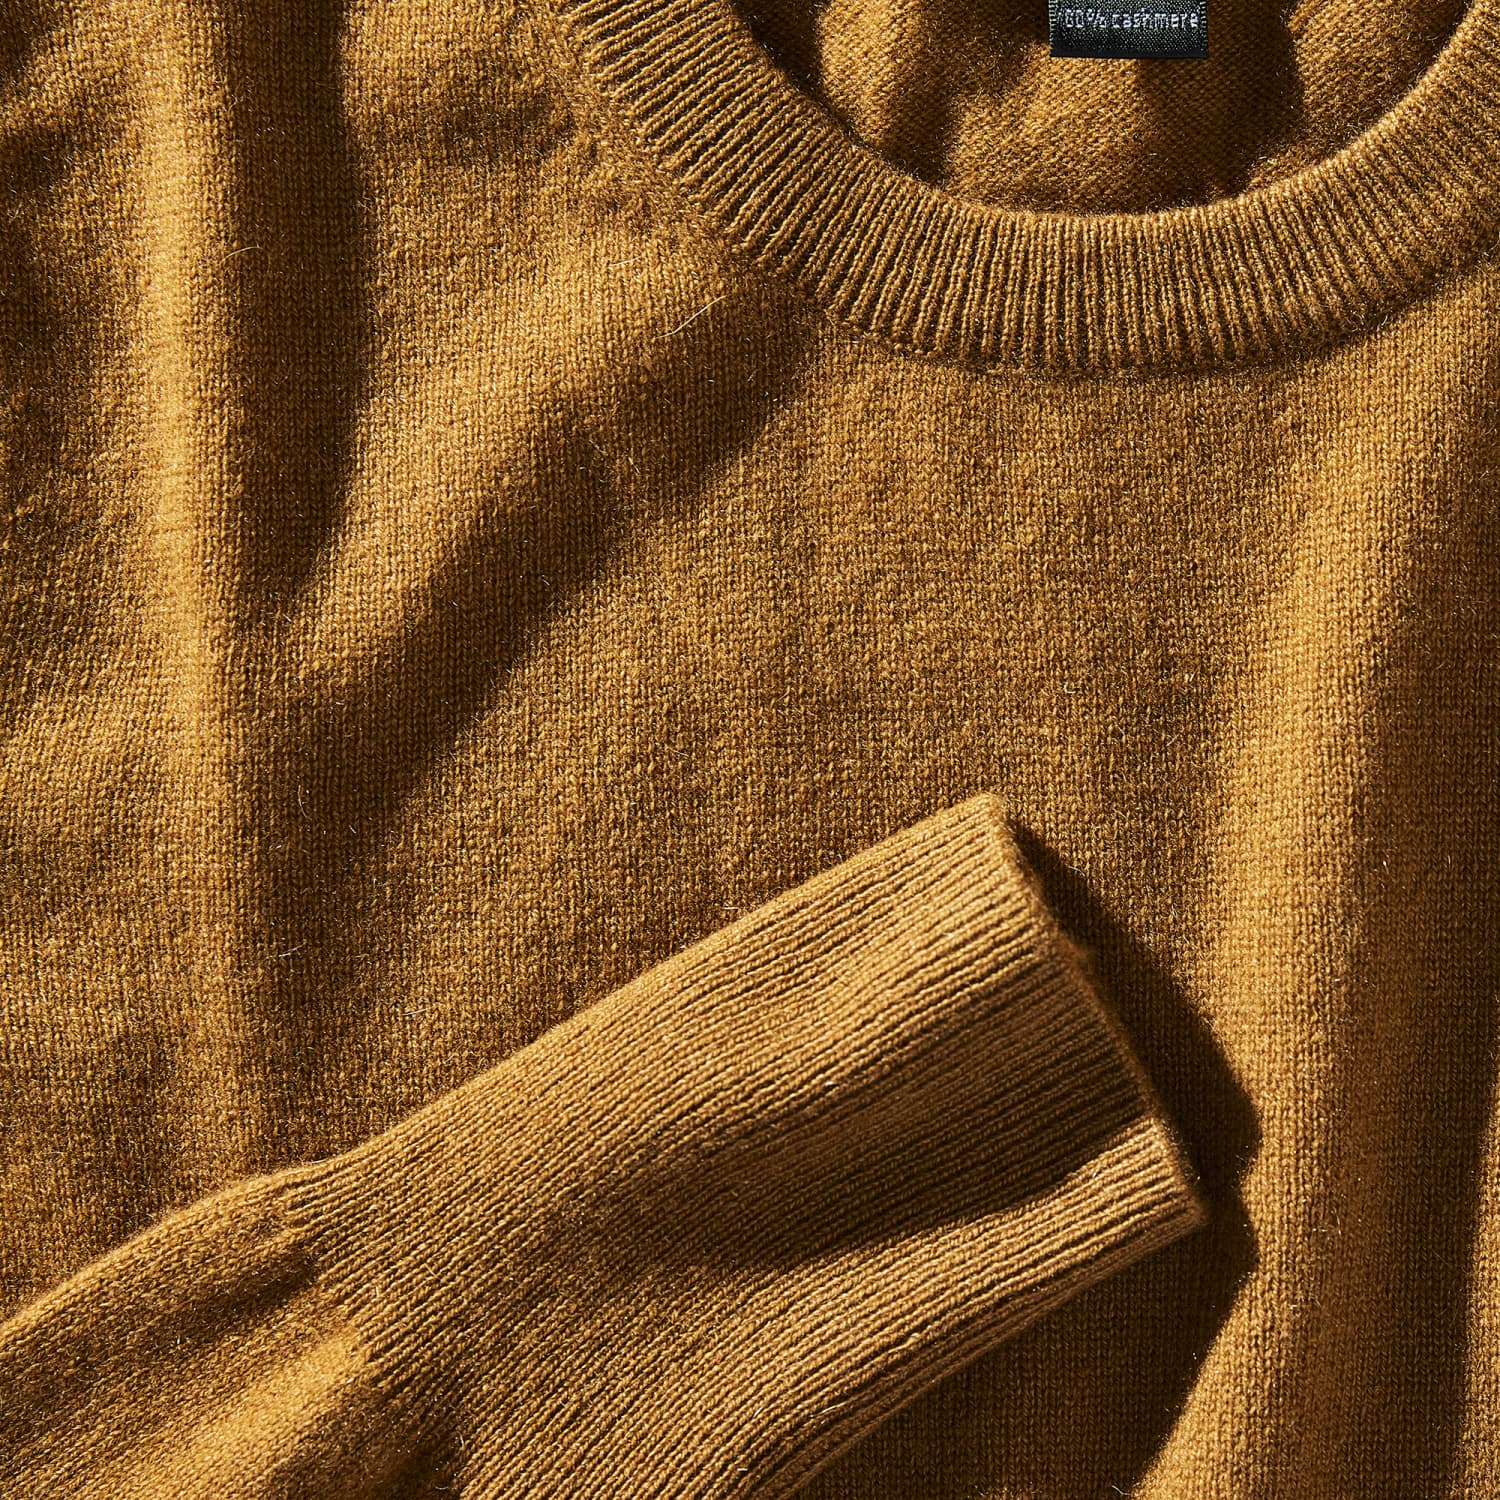 How to Wash Cashmere Sweaters